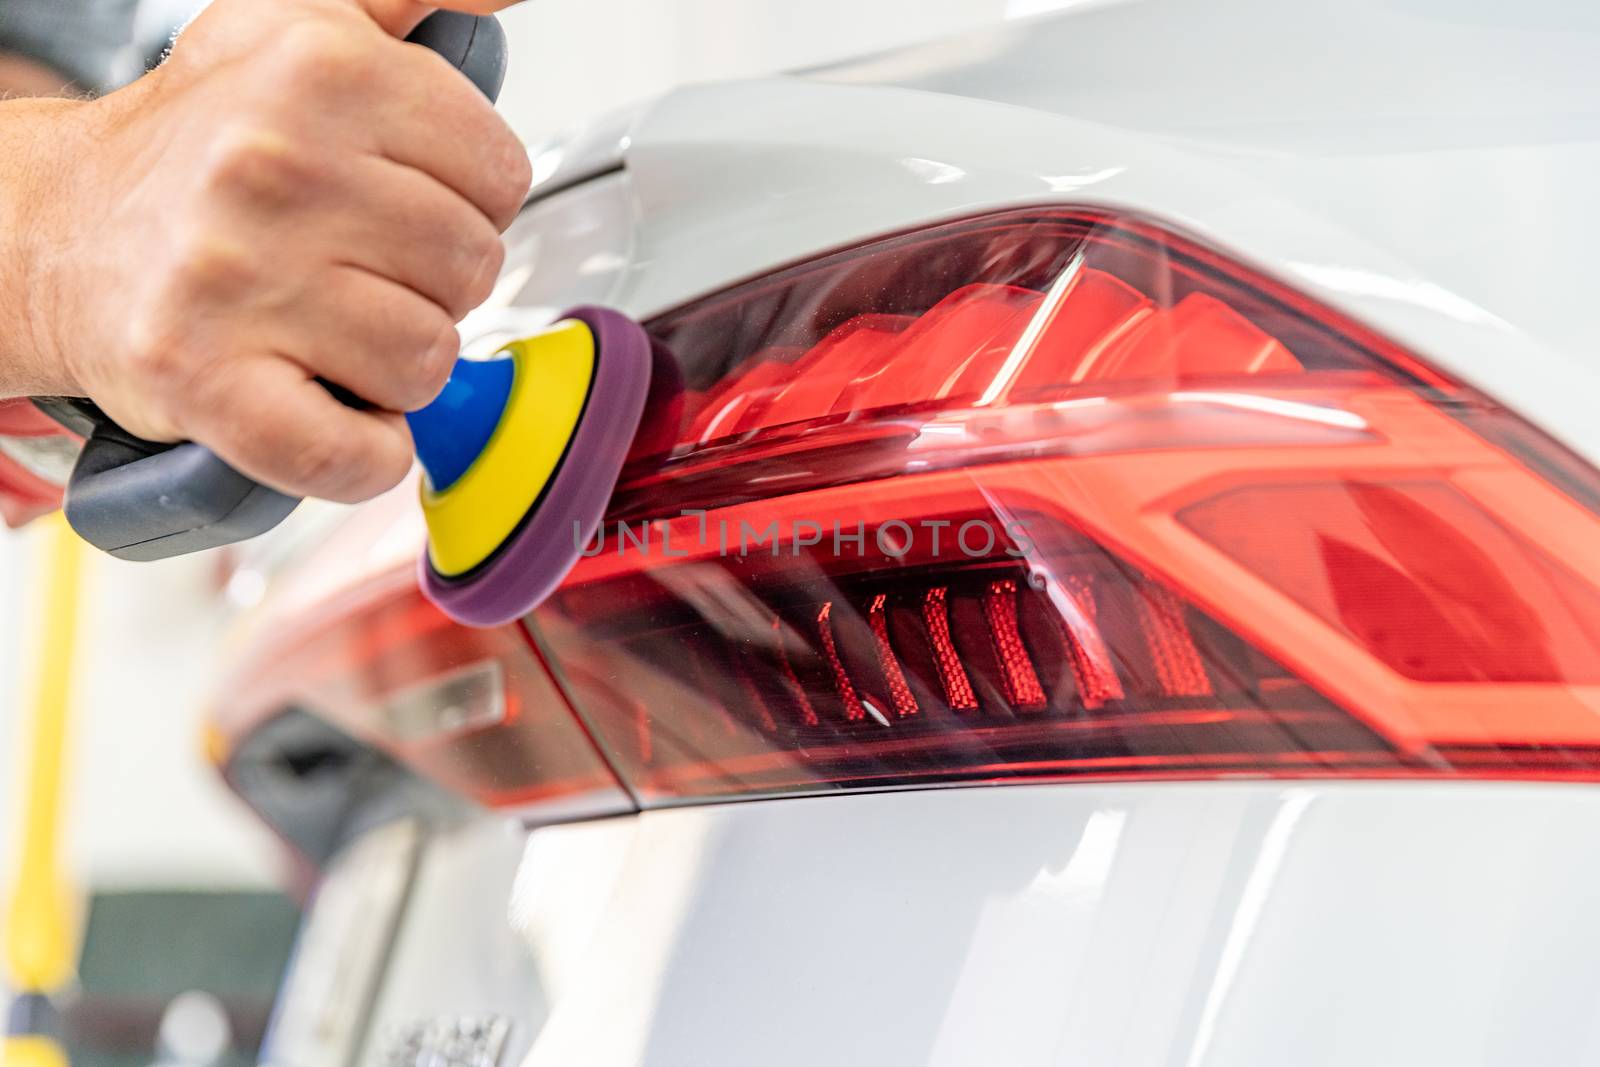 manual polishing of the headlight of luxury cars with the application of protective equipment by Edophoto